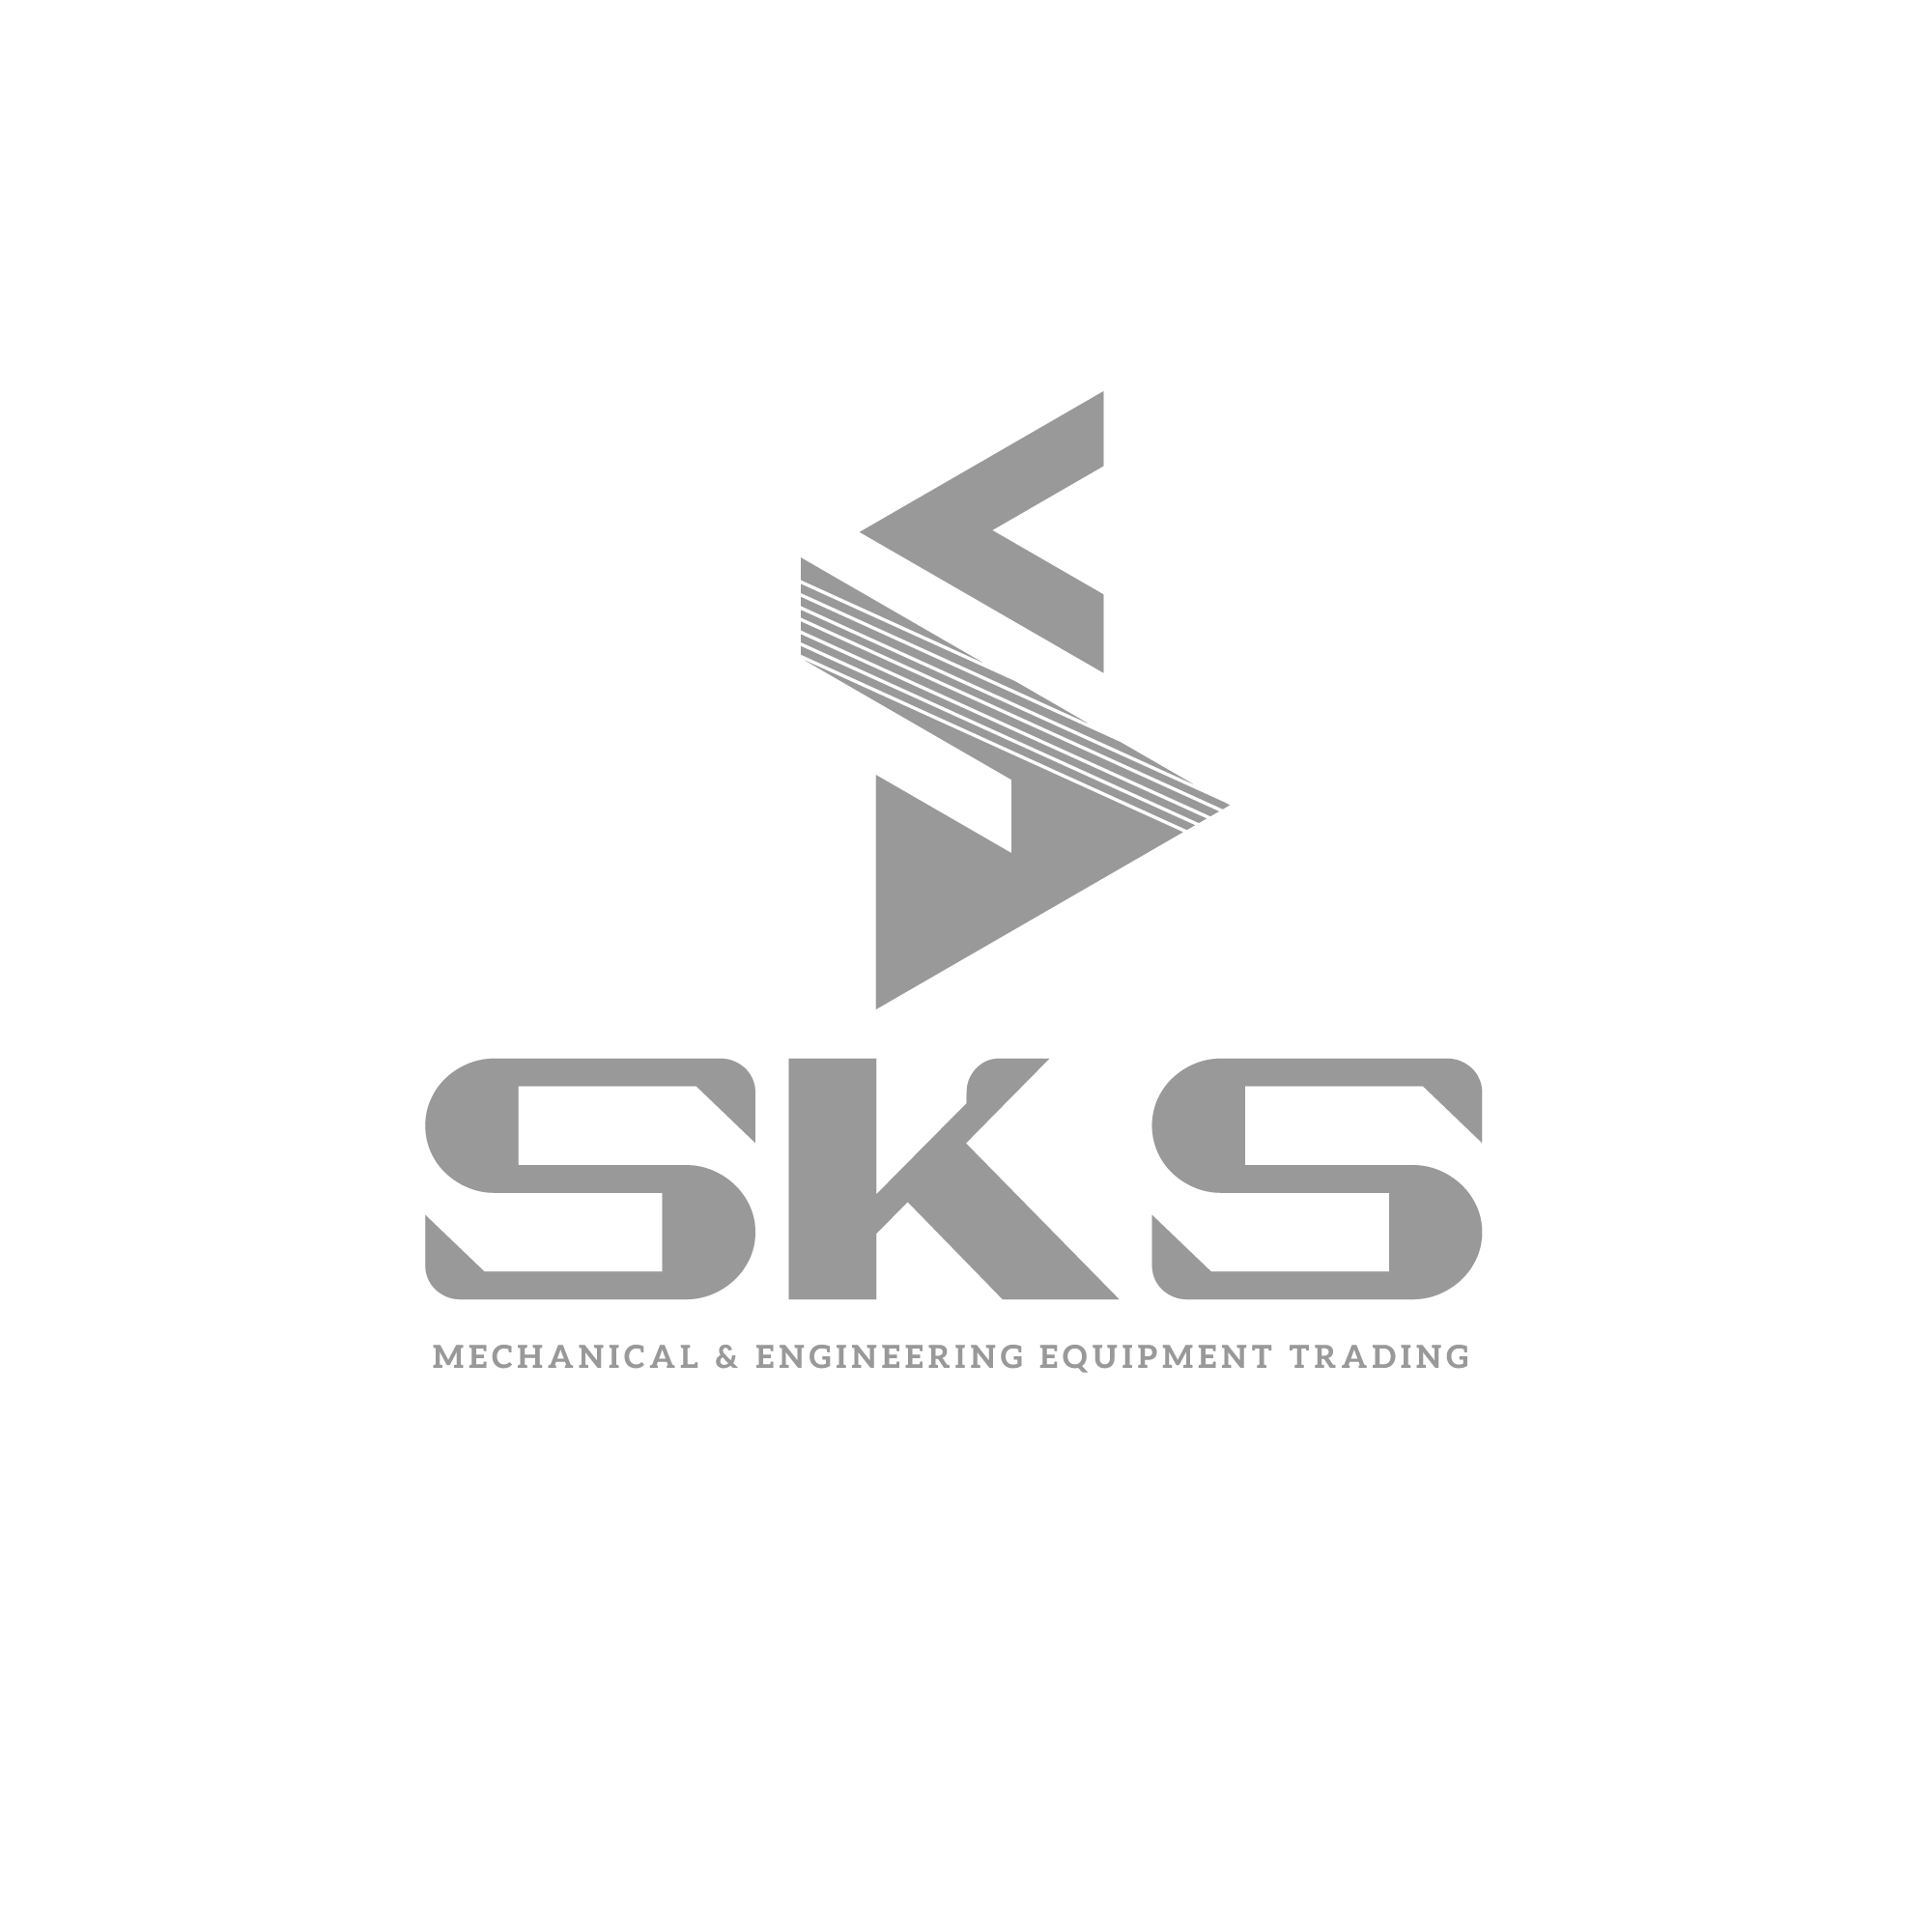 Sks Logo designs, themes, templates and downloadable graphic elements on  Dribbble